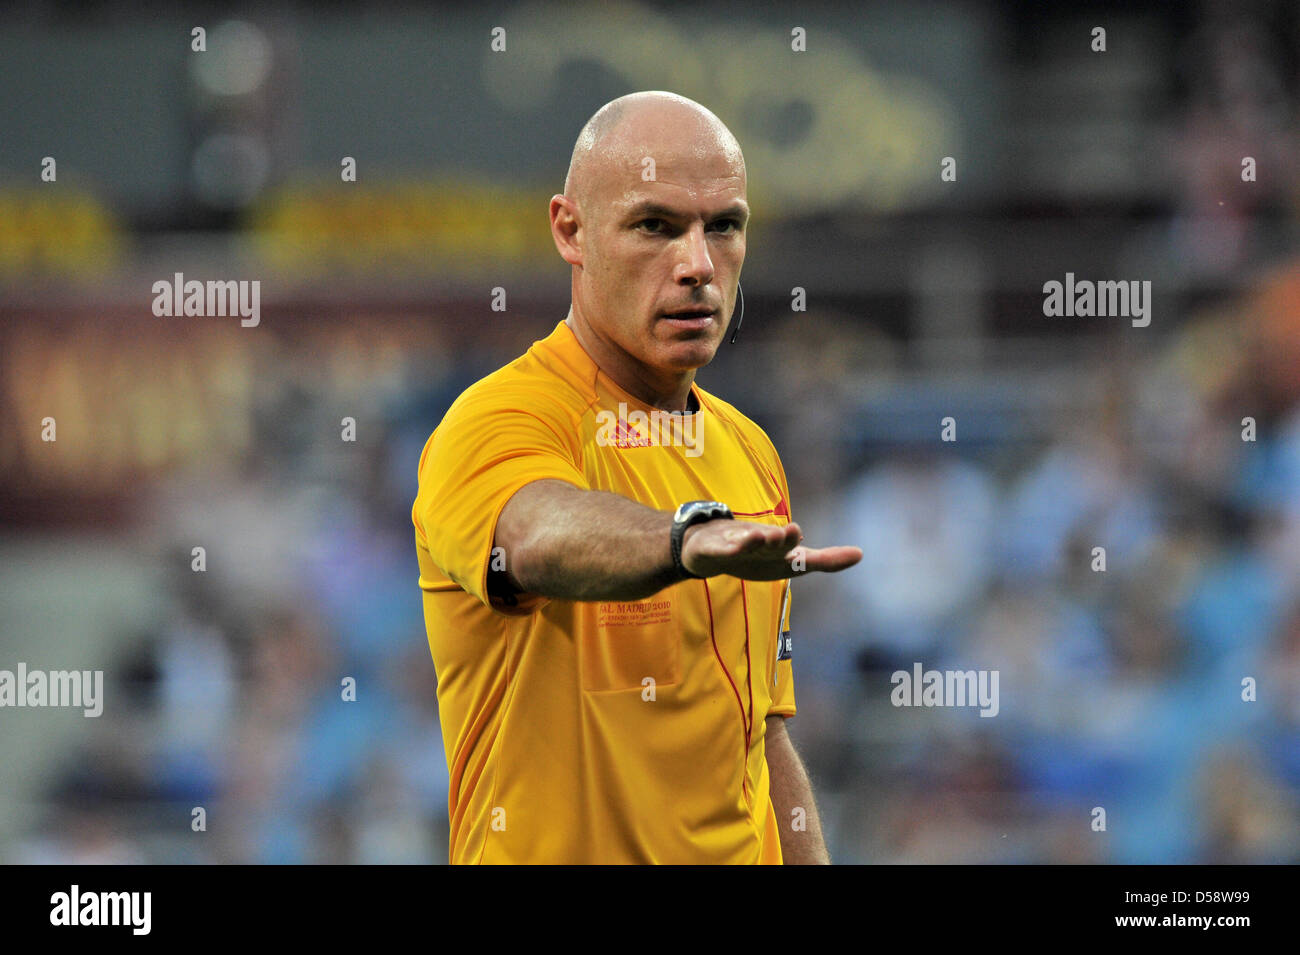 England's referee Howard Webb gives instructions during the UEFA Champions League final FC Bayern Munich vs FC Internazionale Milano at Santiago Bernabeu stadium in Madrid, Spain, 22 May 2010. Bayern Munich lost the match 0-2. Photo: Peter Kneffel Stock Photo